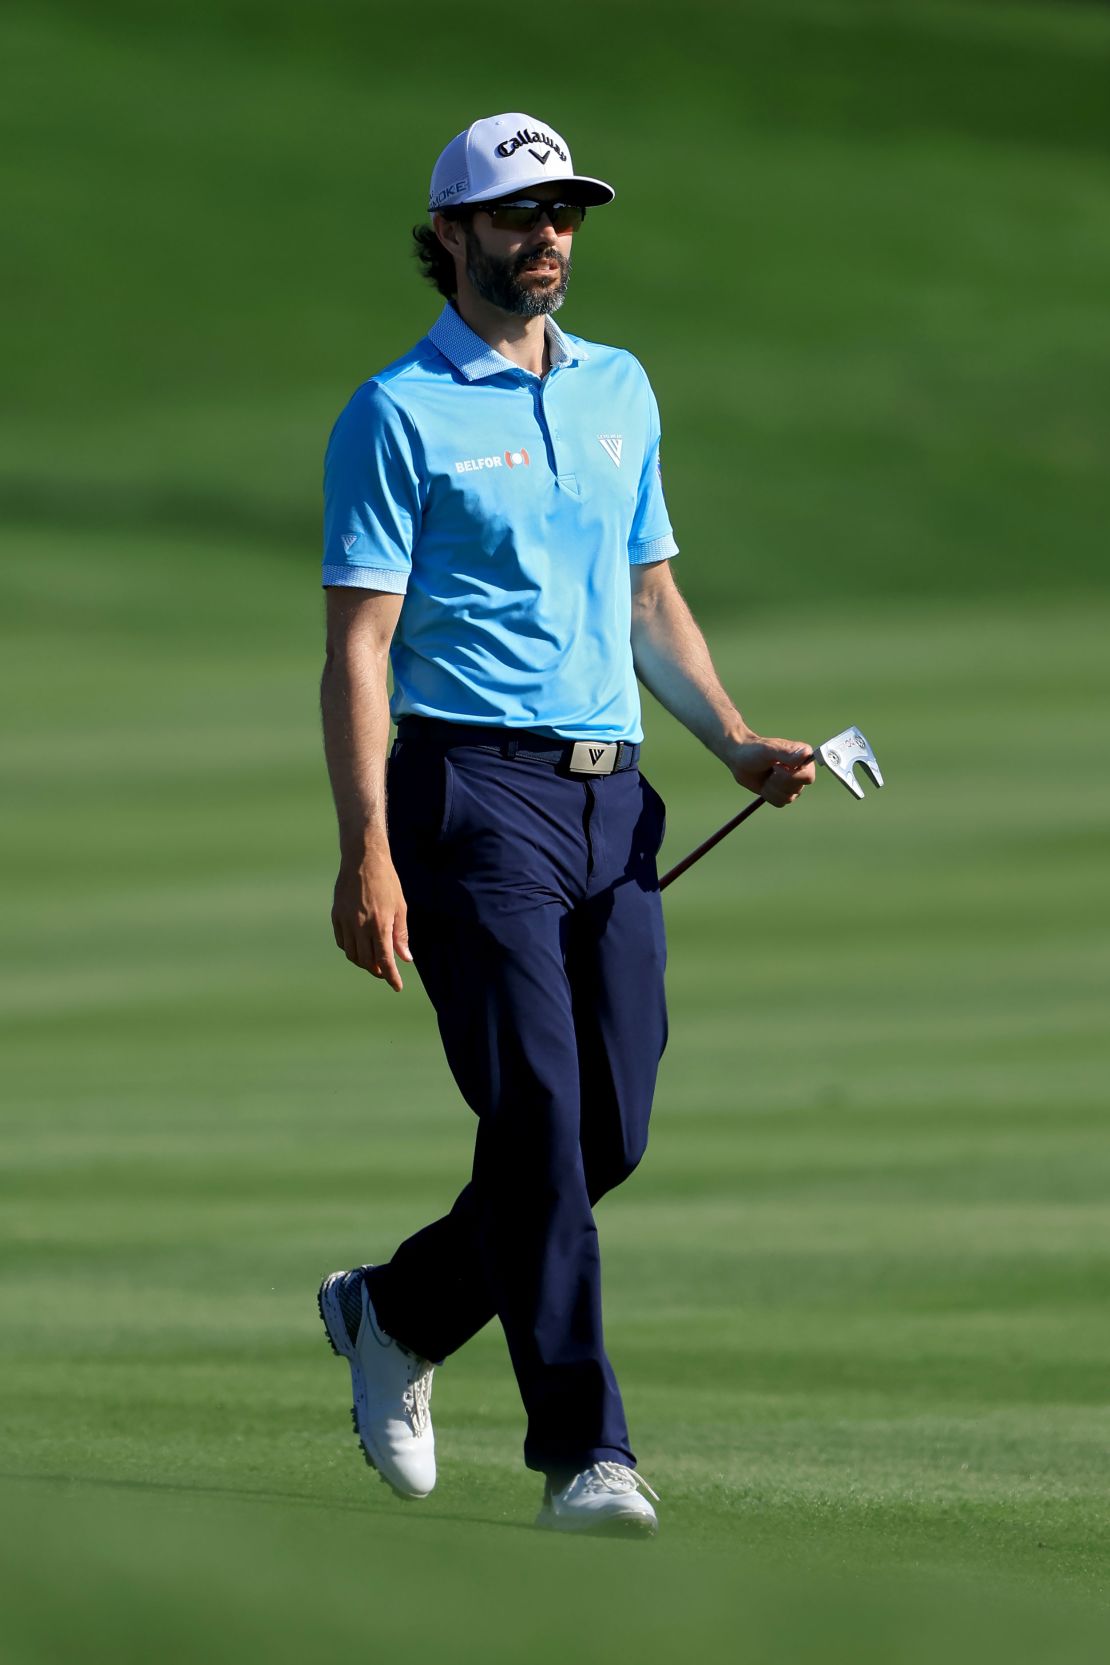 Hadwin endured a nightmare end to his first round.